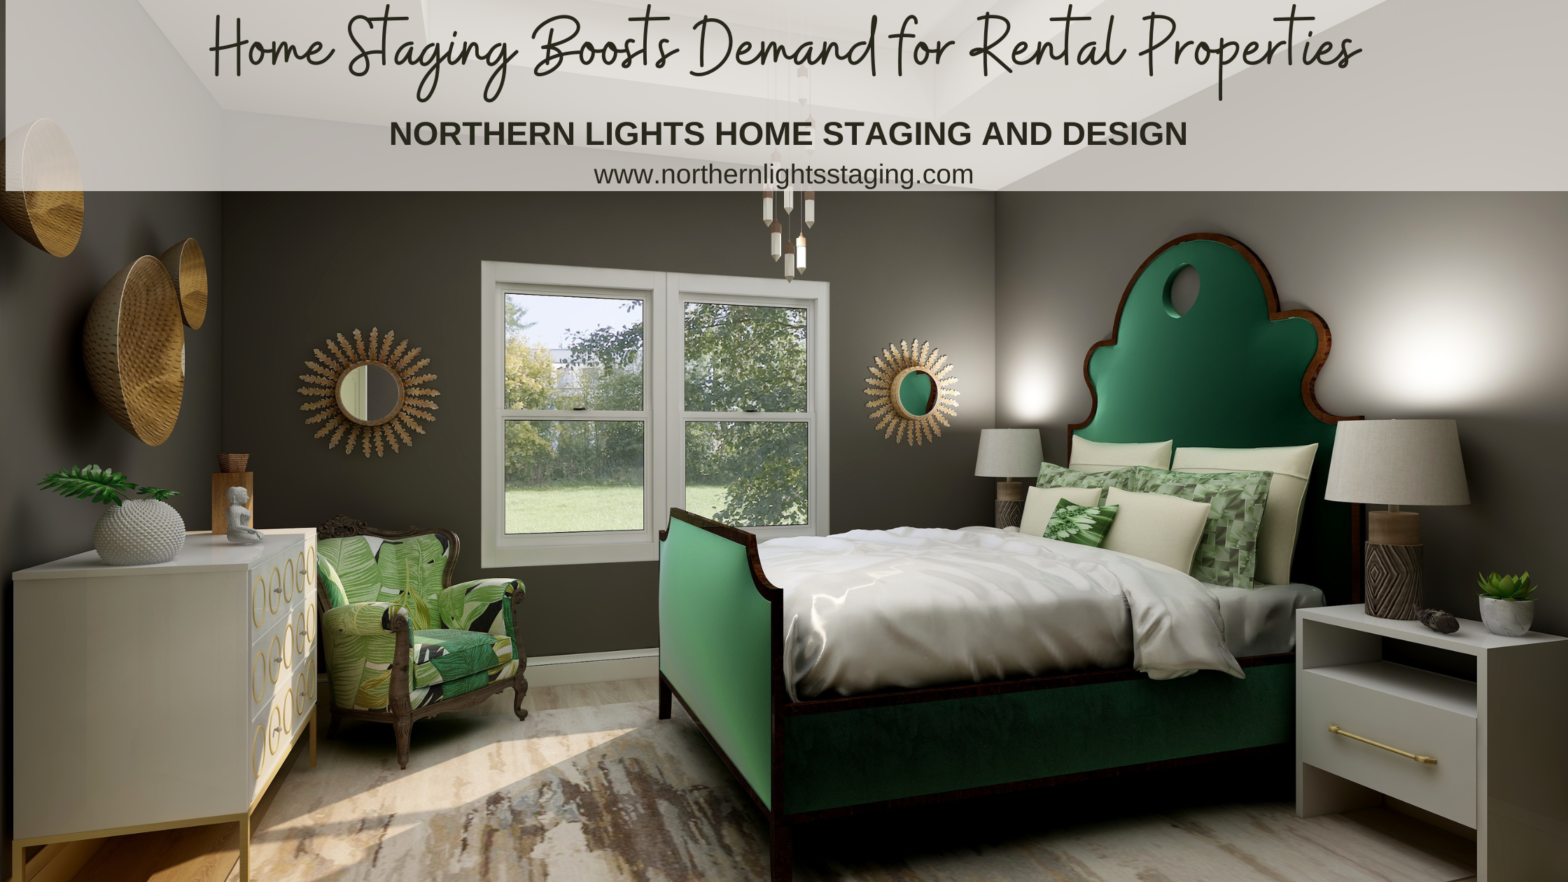 Home Staging Boosts Demand for Rental Properties